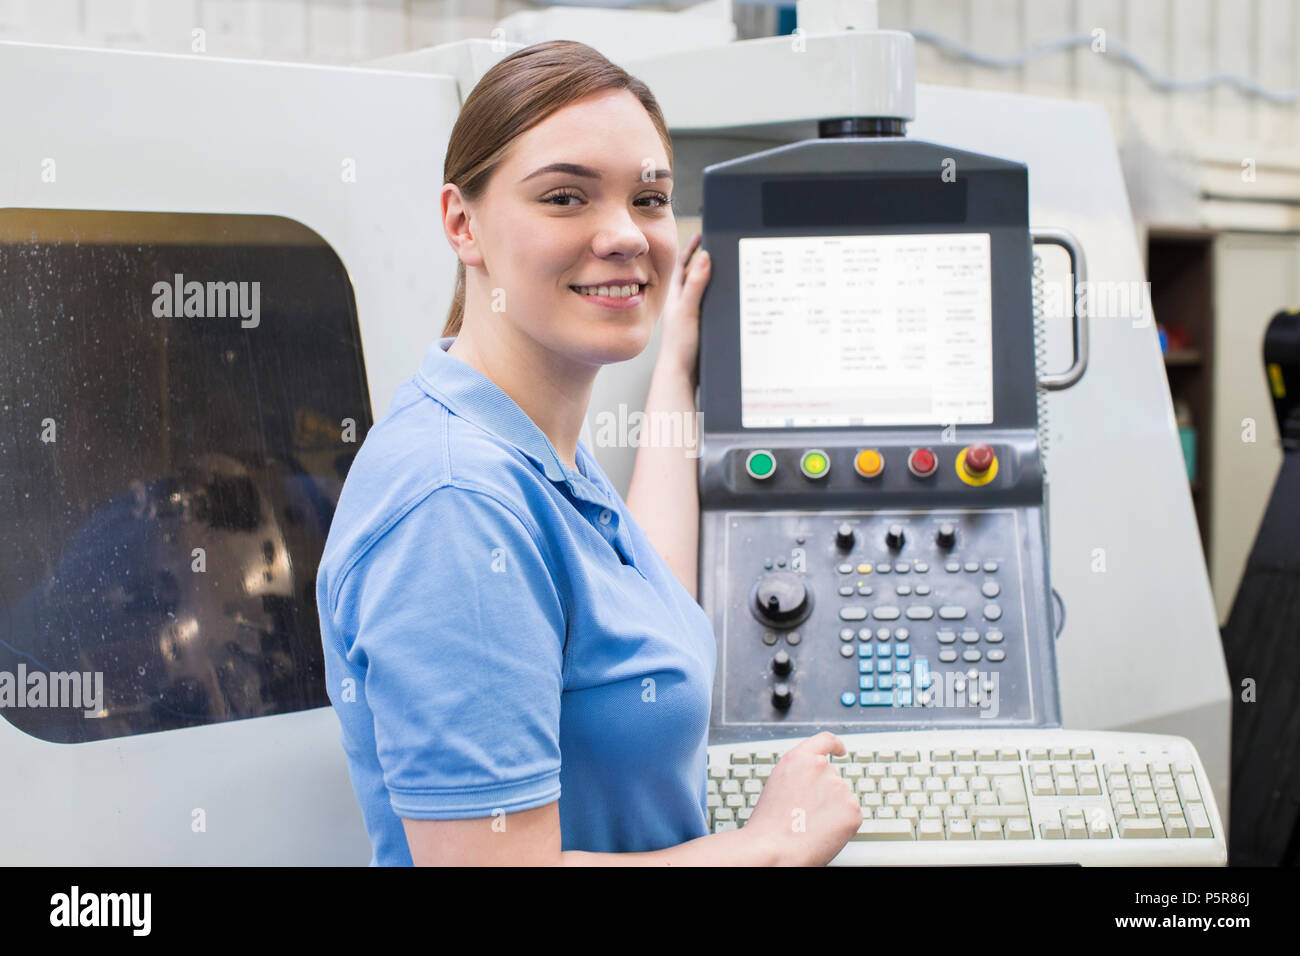 Portrait Of Female Apprentice Engineer Operating CNC Machine In Factory Stock Photo